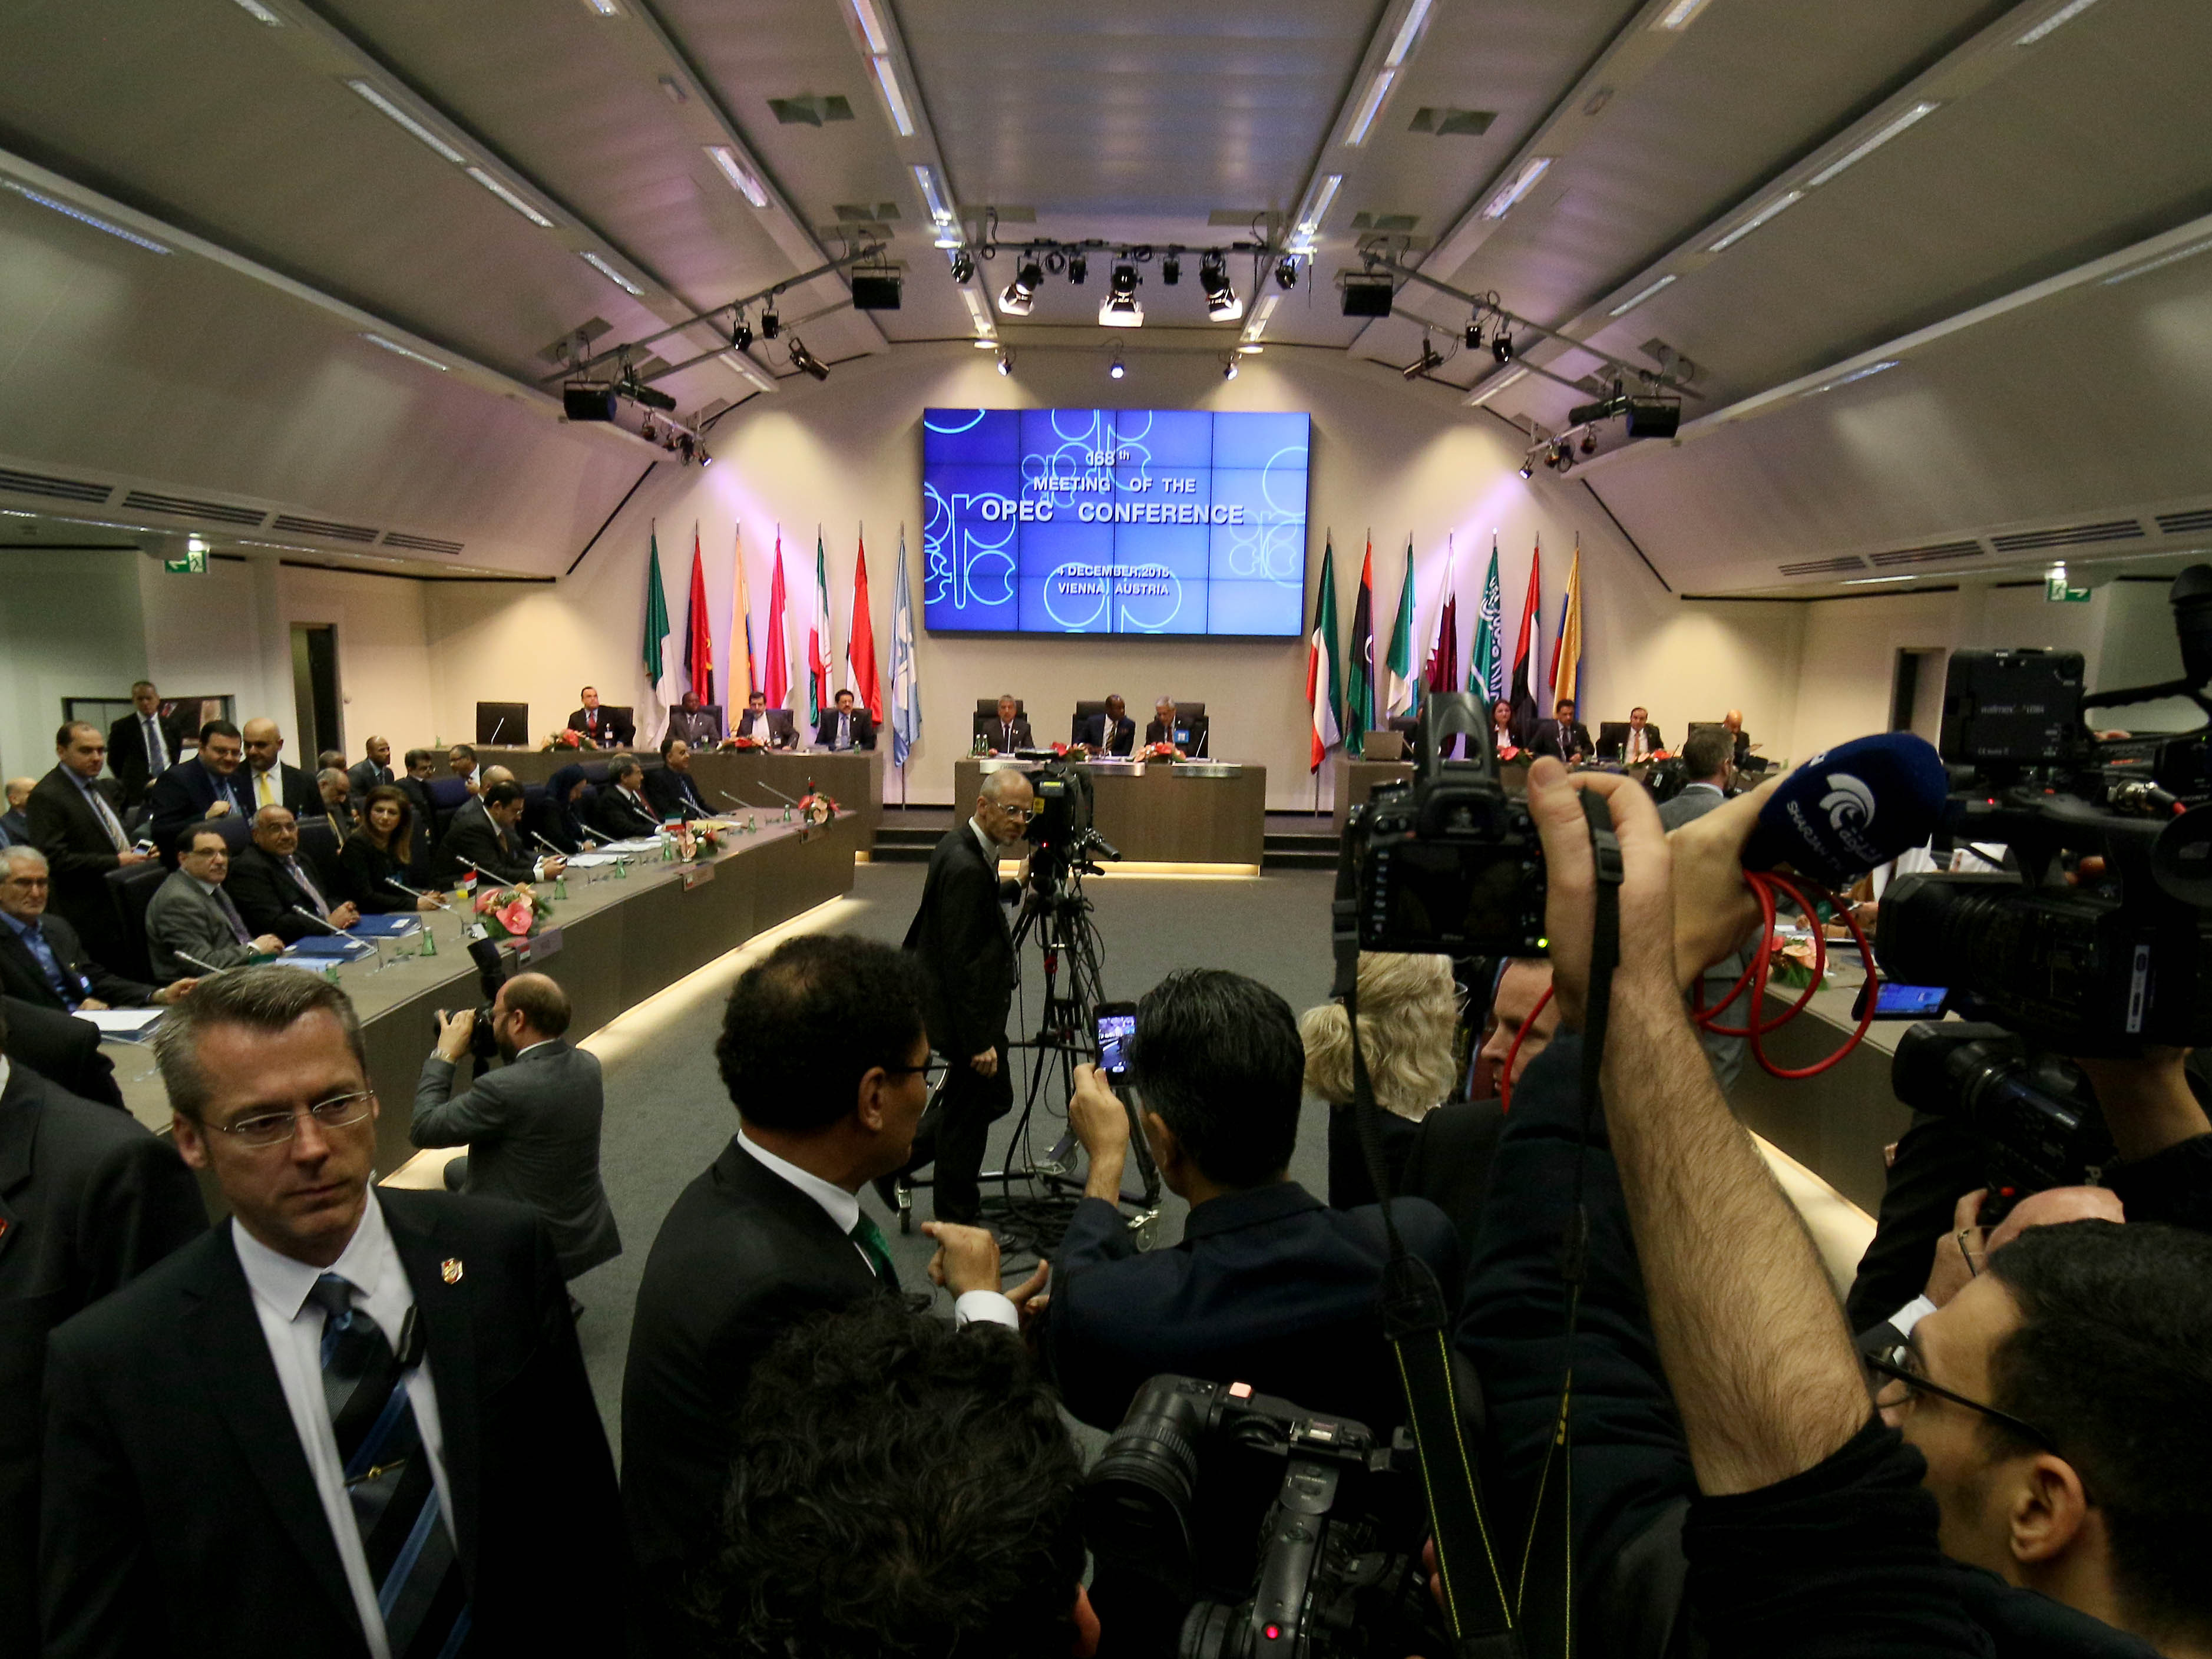 OPEC oil ministers